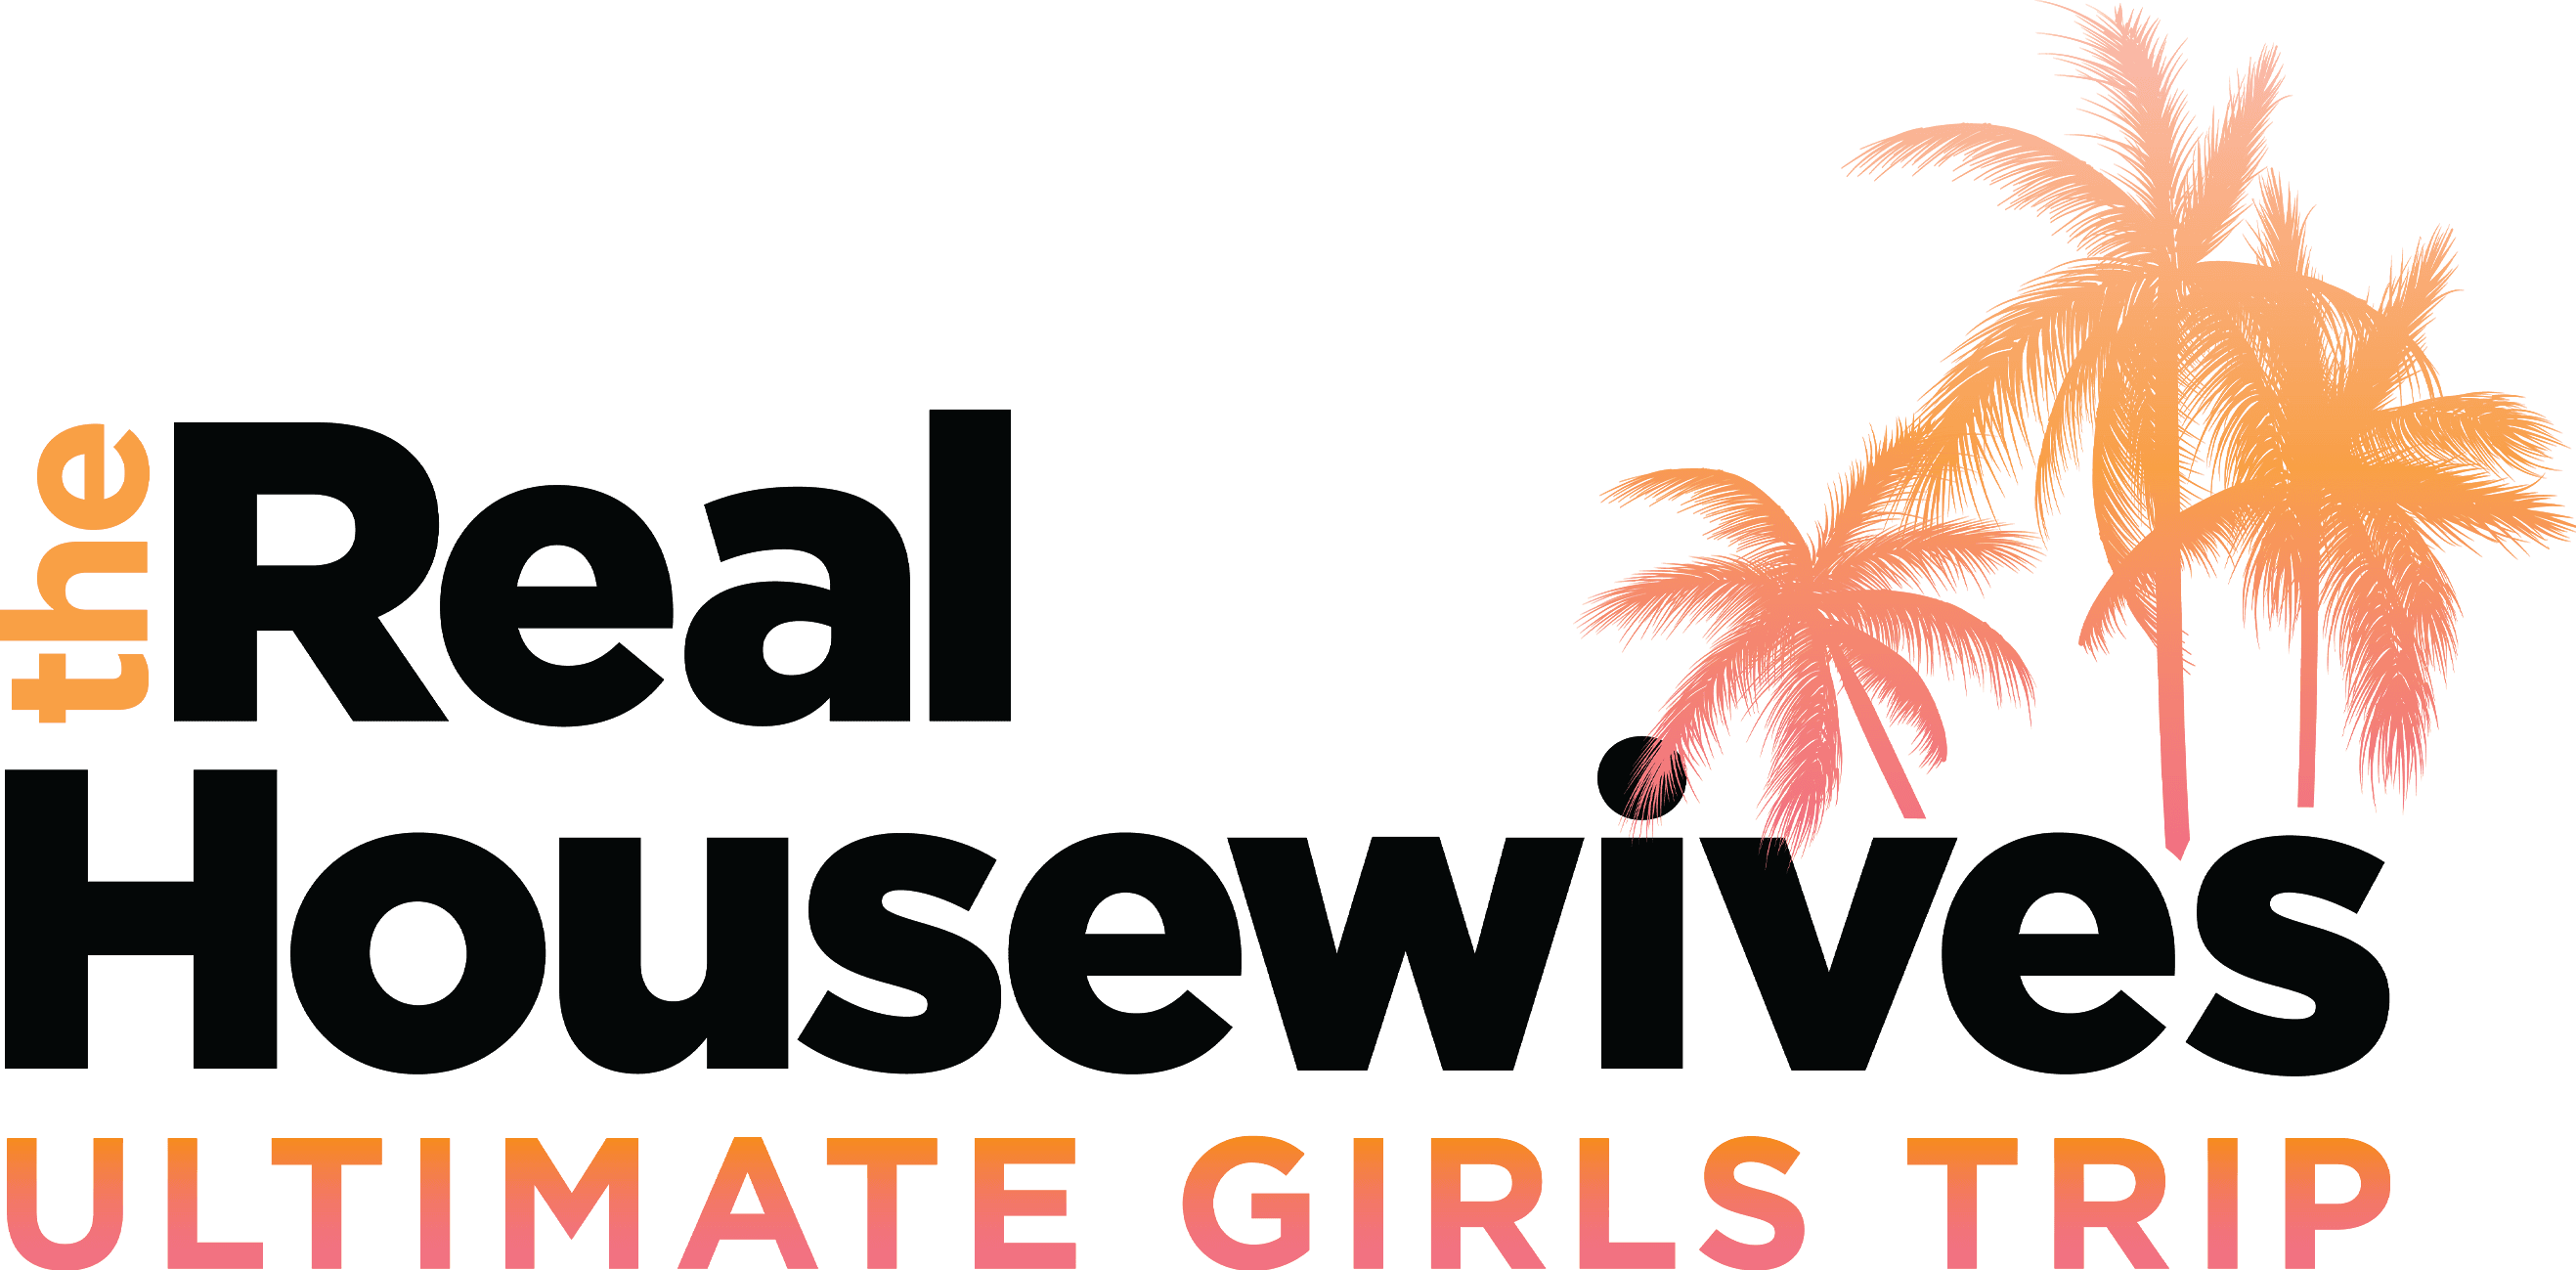 The Real Housewives Ultimate Girls Trip logo